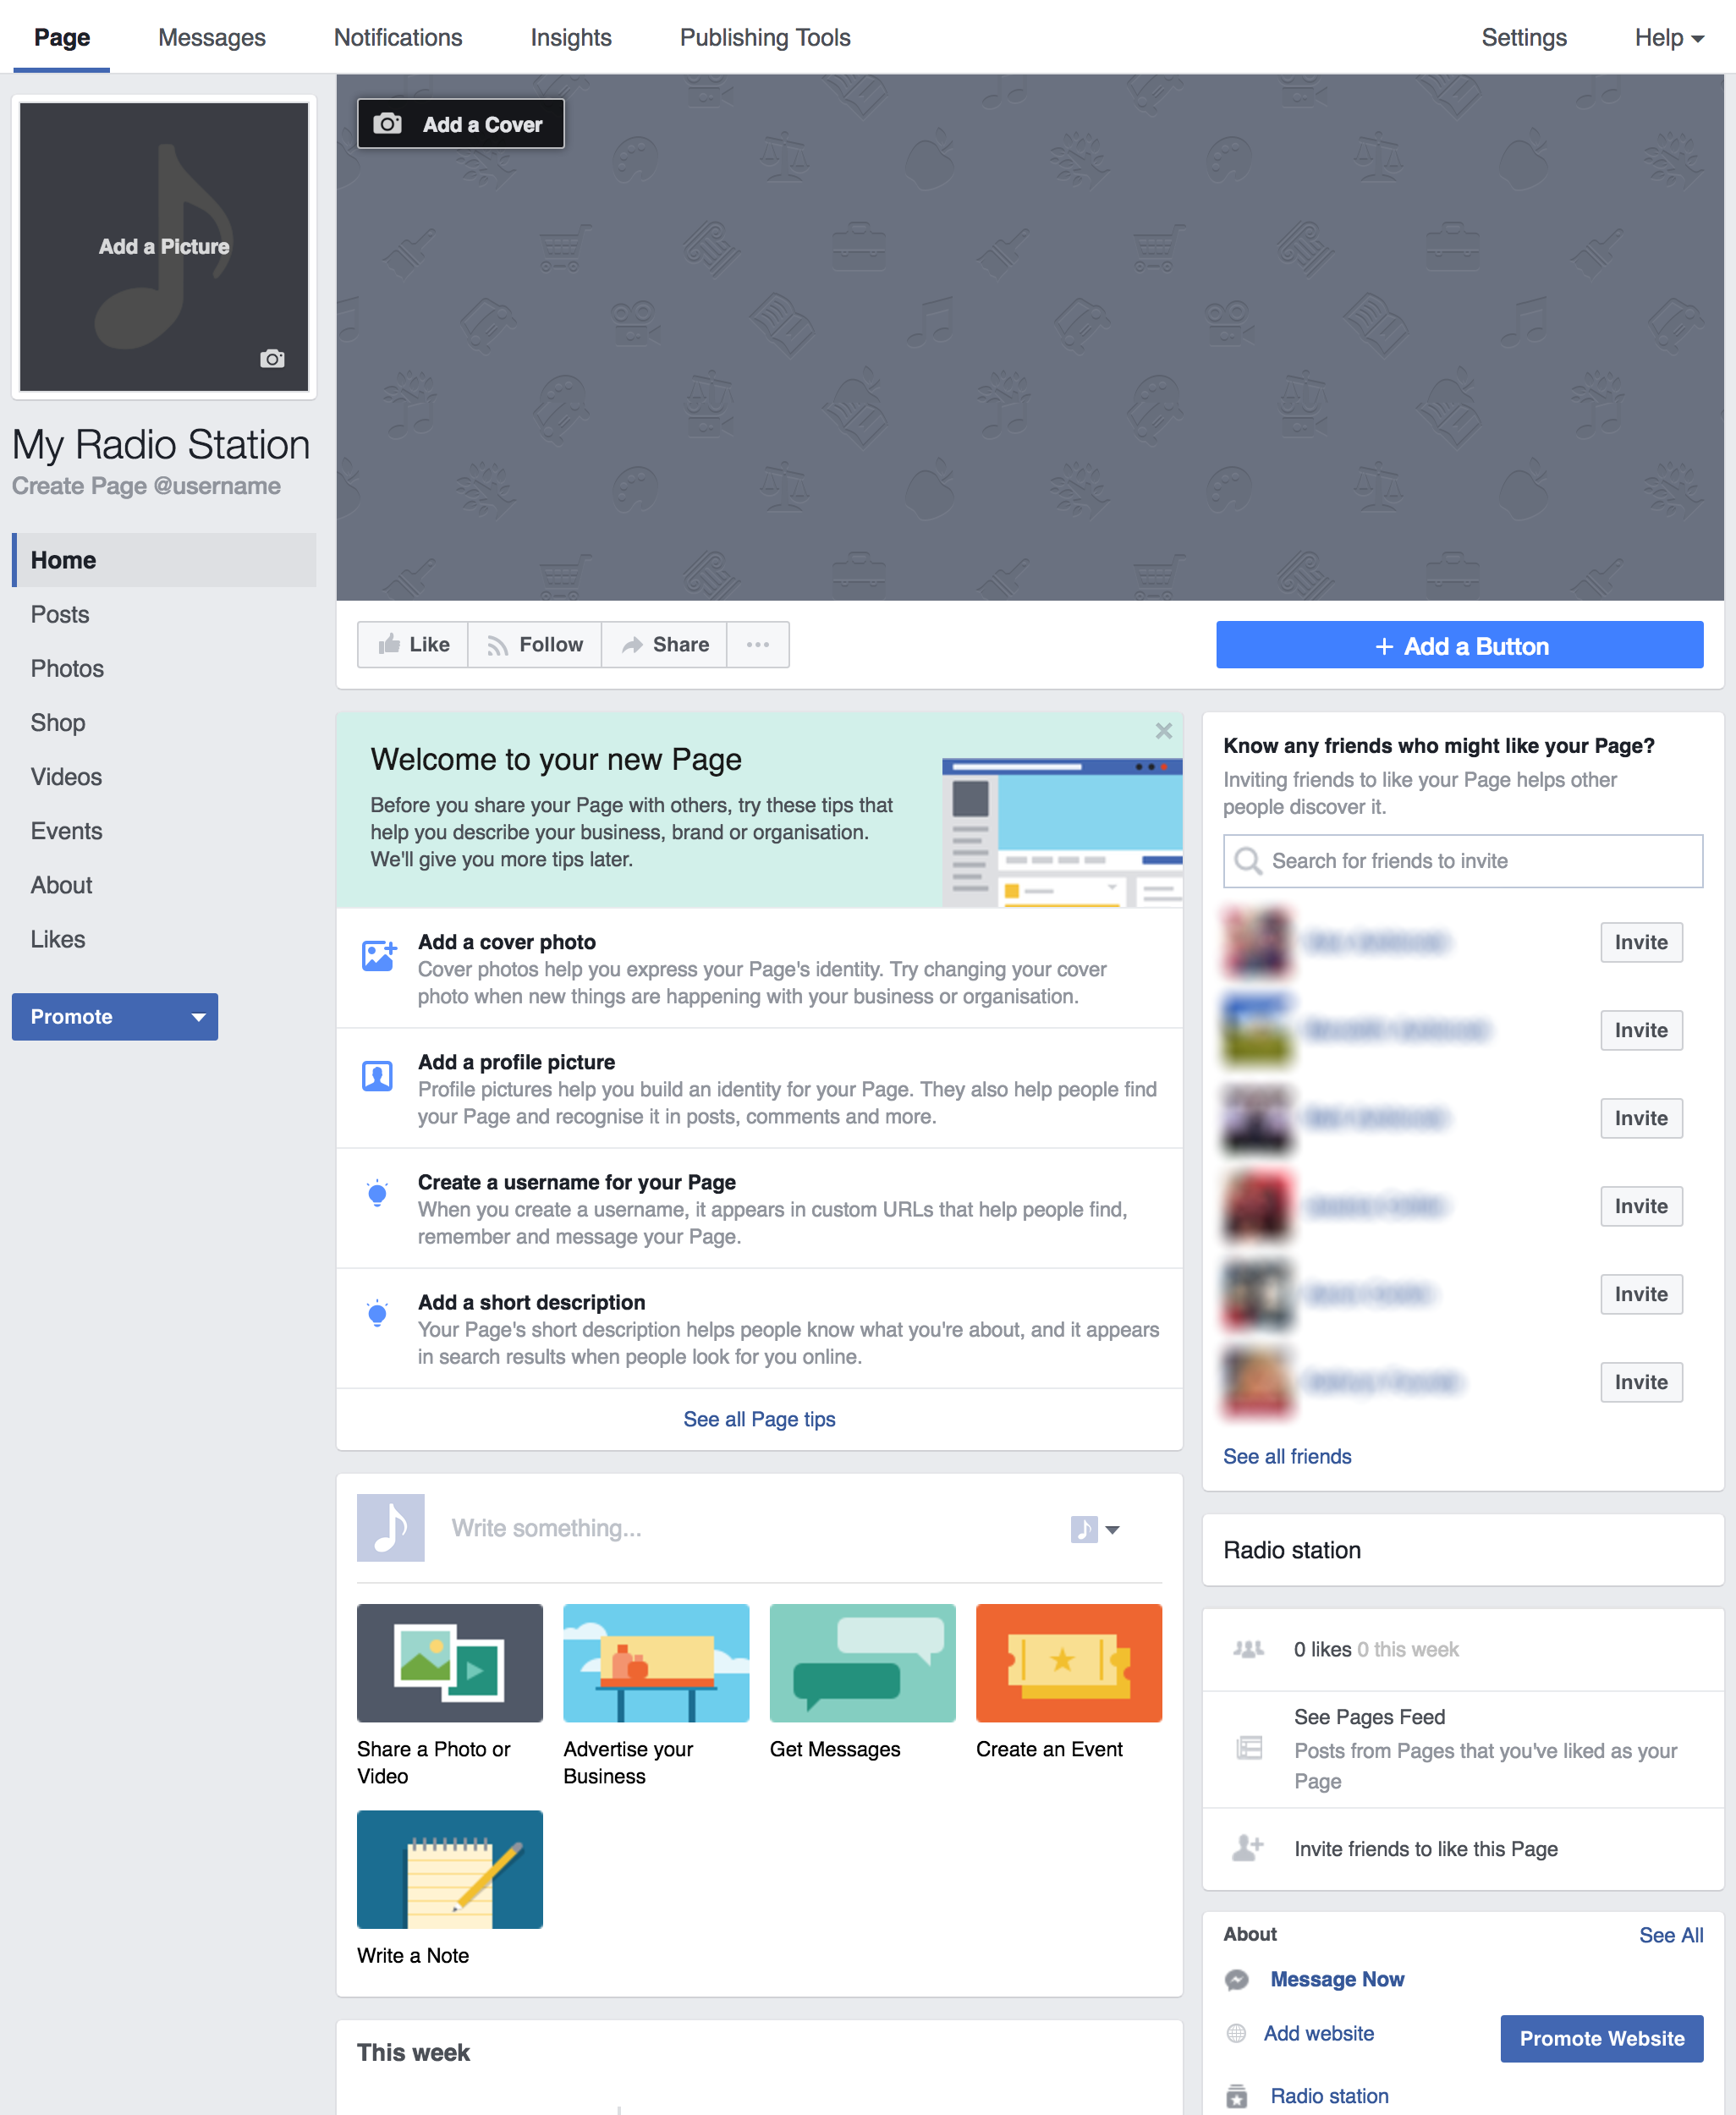 Example Facebook Page - Setup a Radio Station Facebook Page